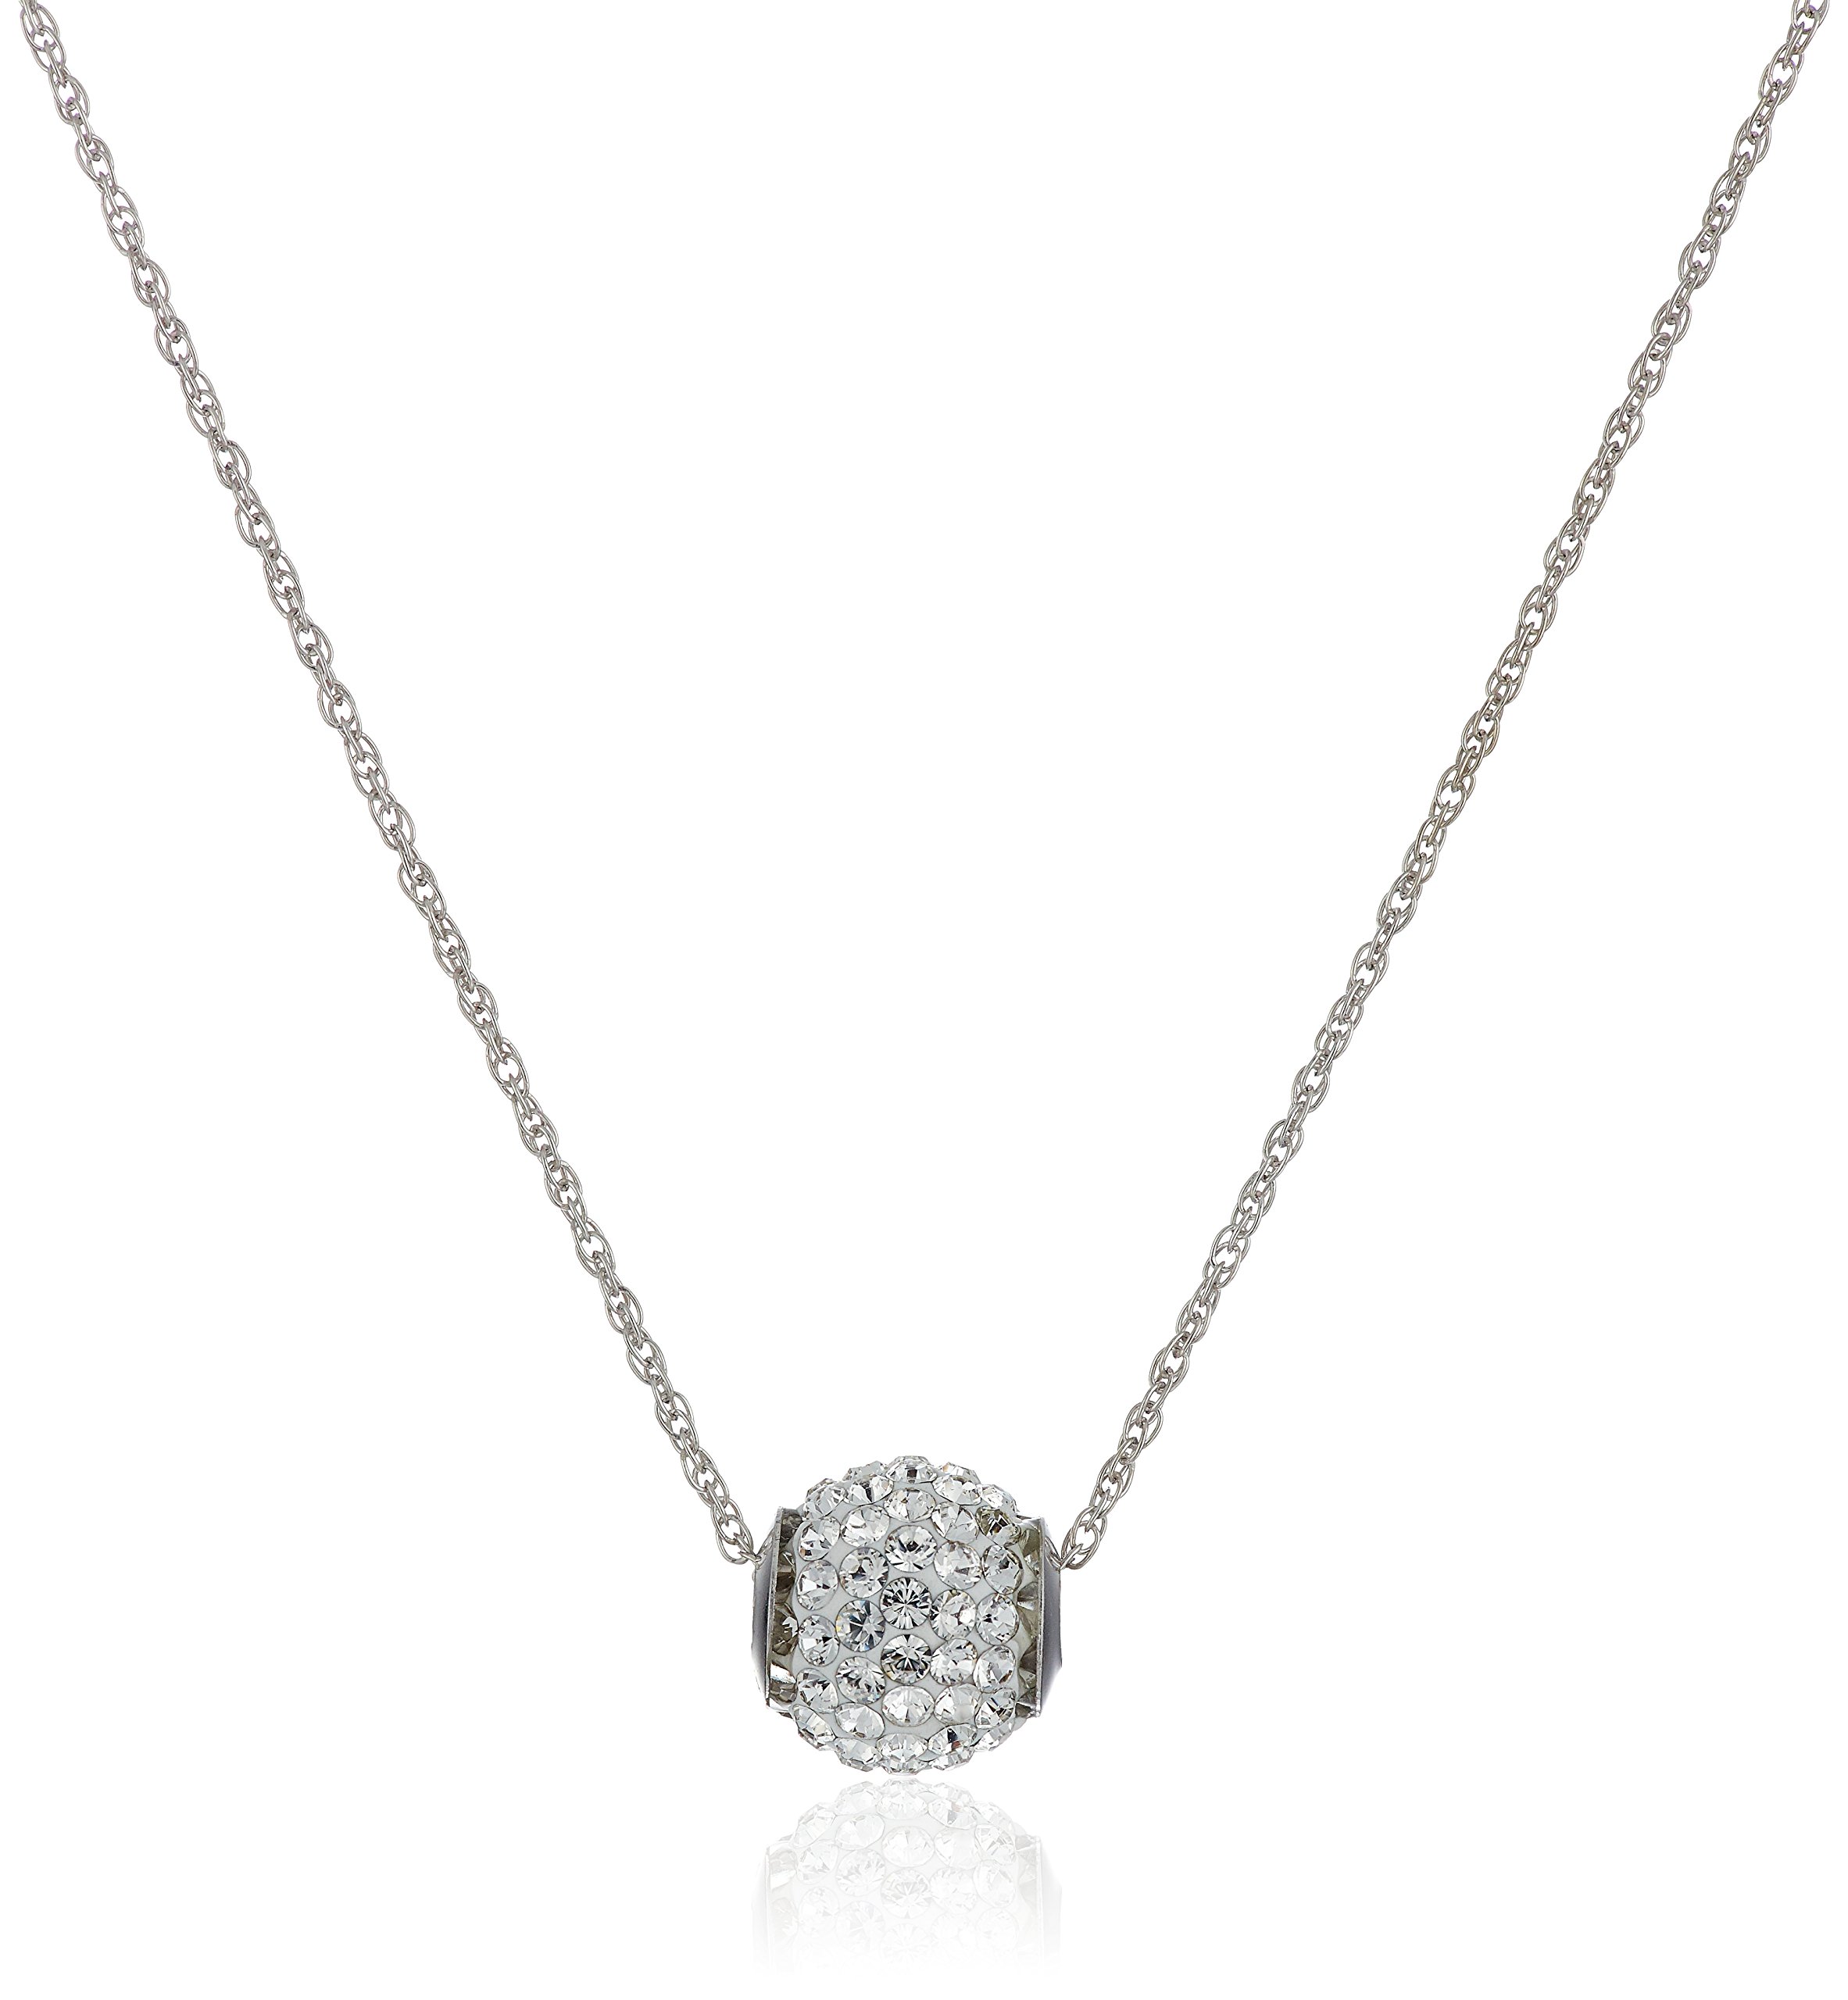 Amazon Collection 10k Crystal Slide Ball Pendant Necklace, 18